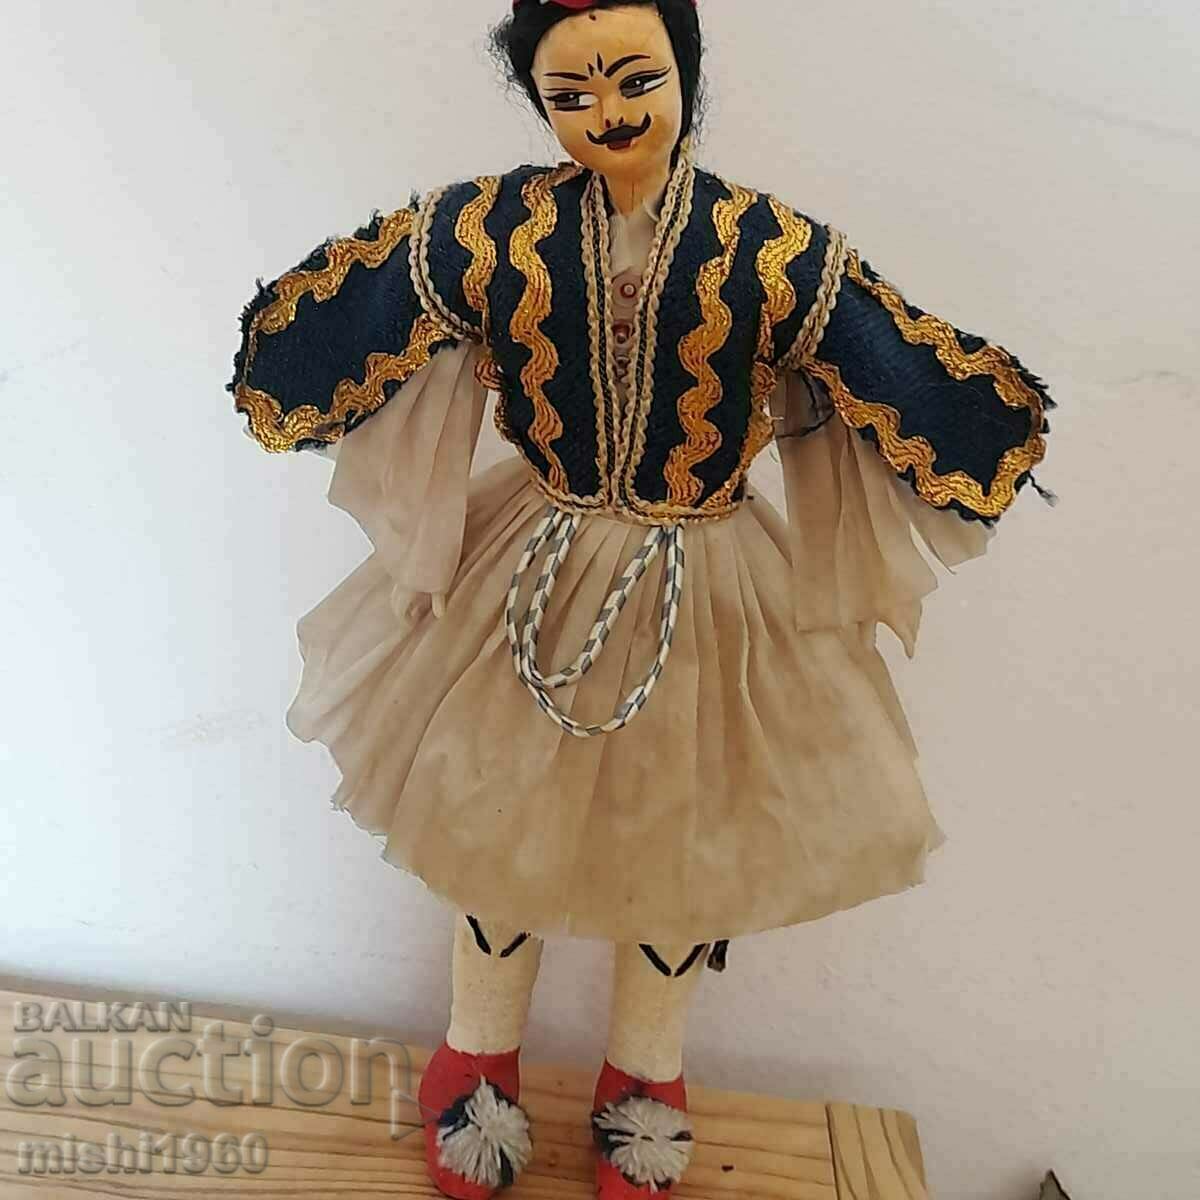 Man doll in costume